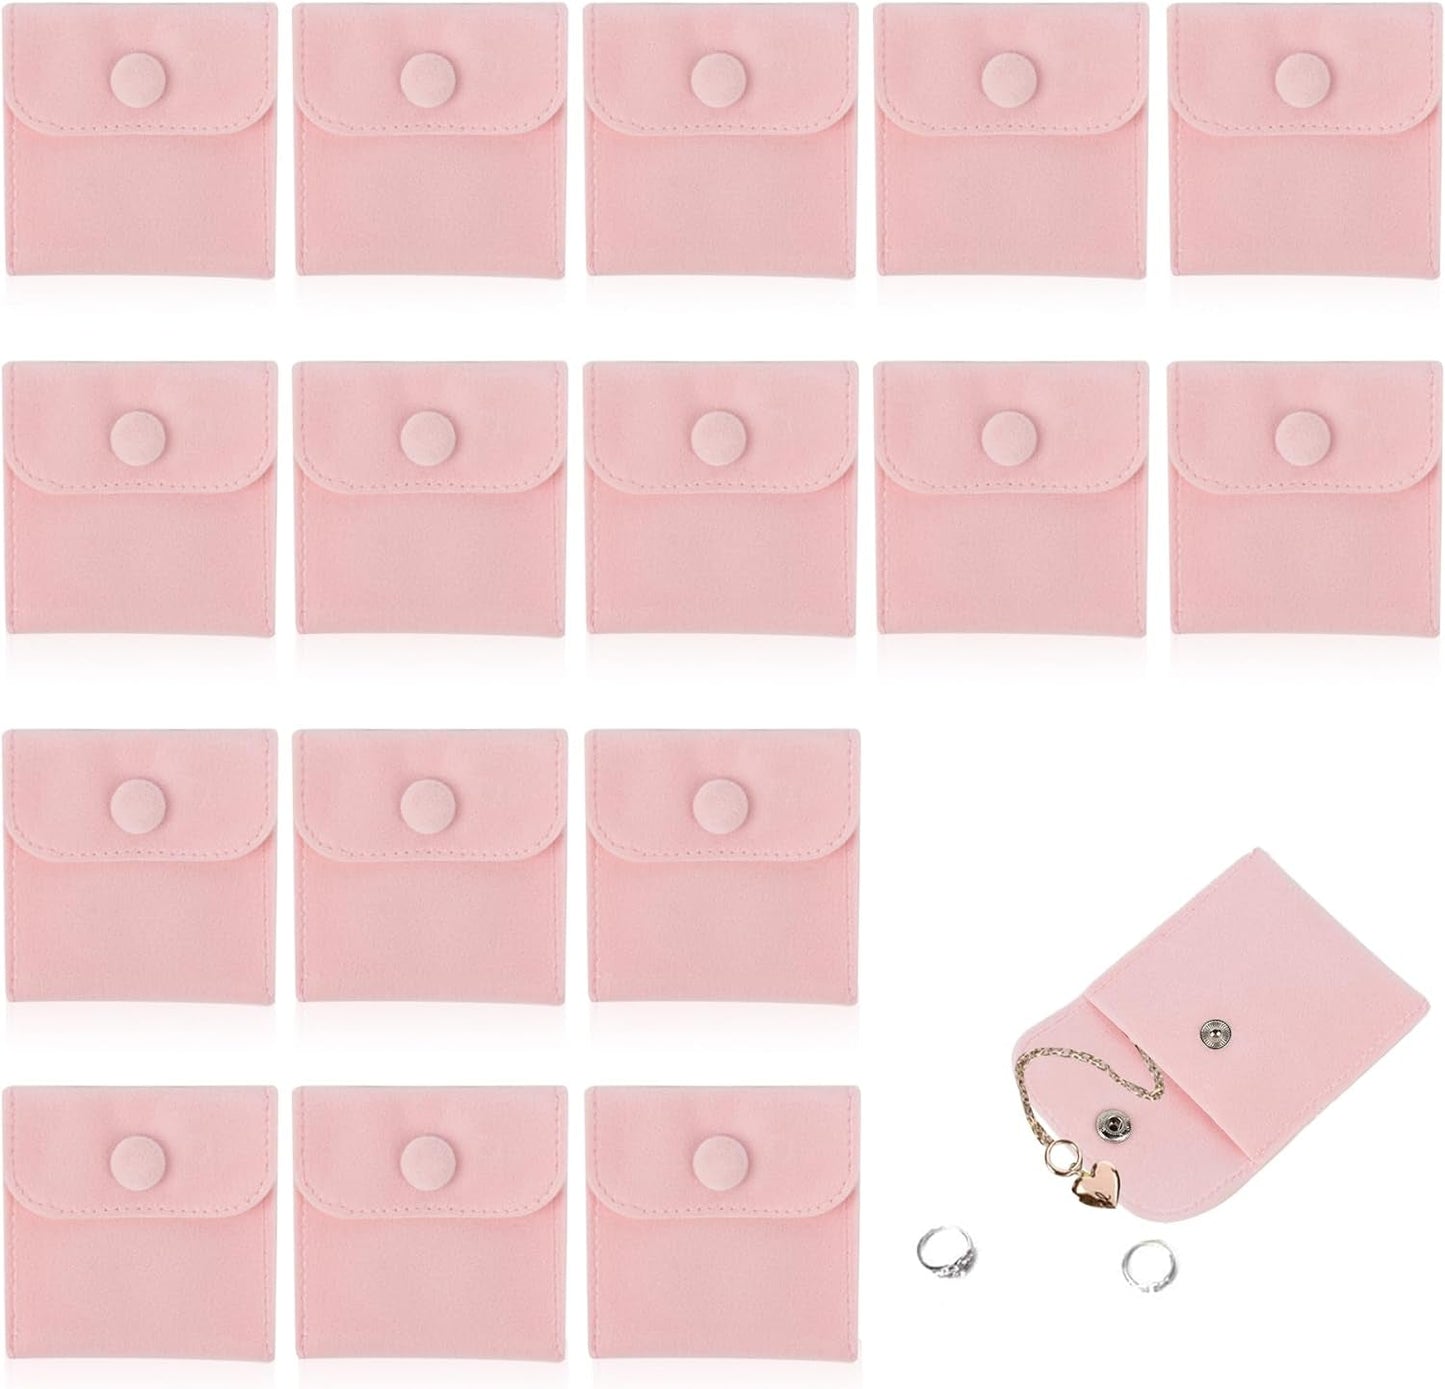 20PCS Velvet Jewelry Pouches with Snap Button, Small Microfiber Velvet Jewelry Bag for Storing Ring Bracelets Necklaces Earring(Pink)